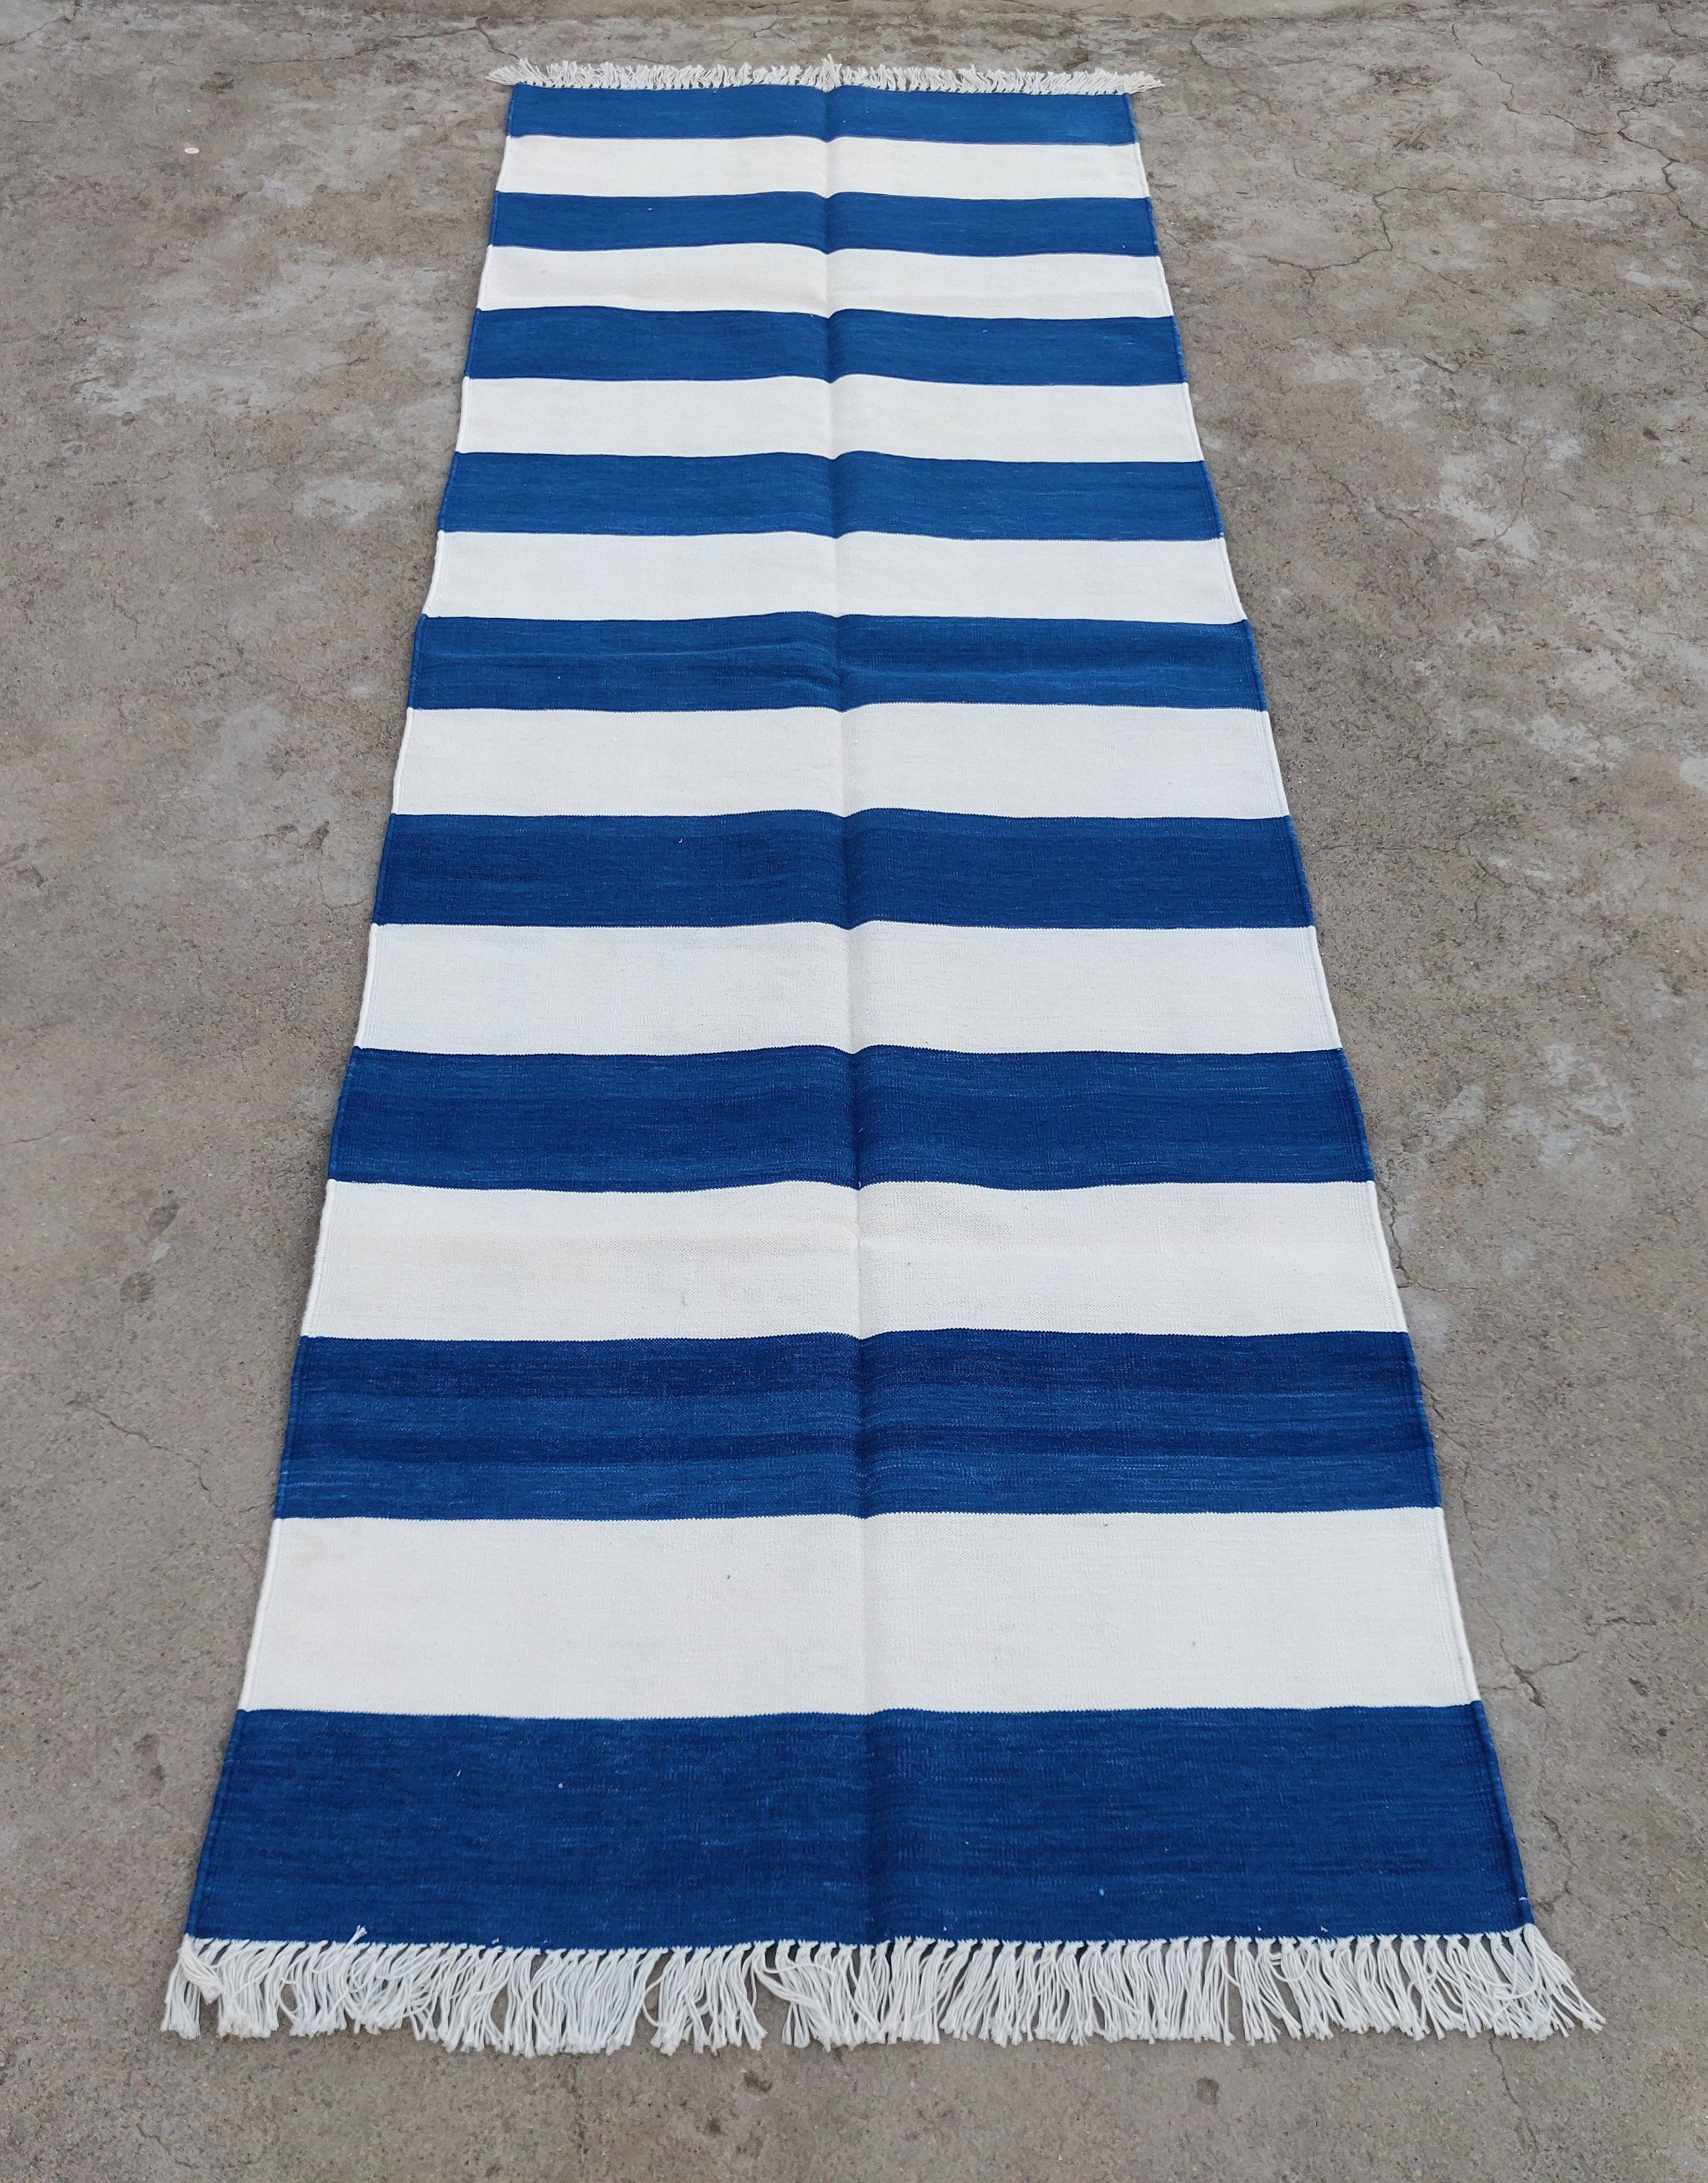 Hand-Woven Handmade Cotton Area Flat Weave Runner, 2.5x8 Blue, White Striped Indian Dhurrie For Sale